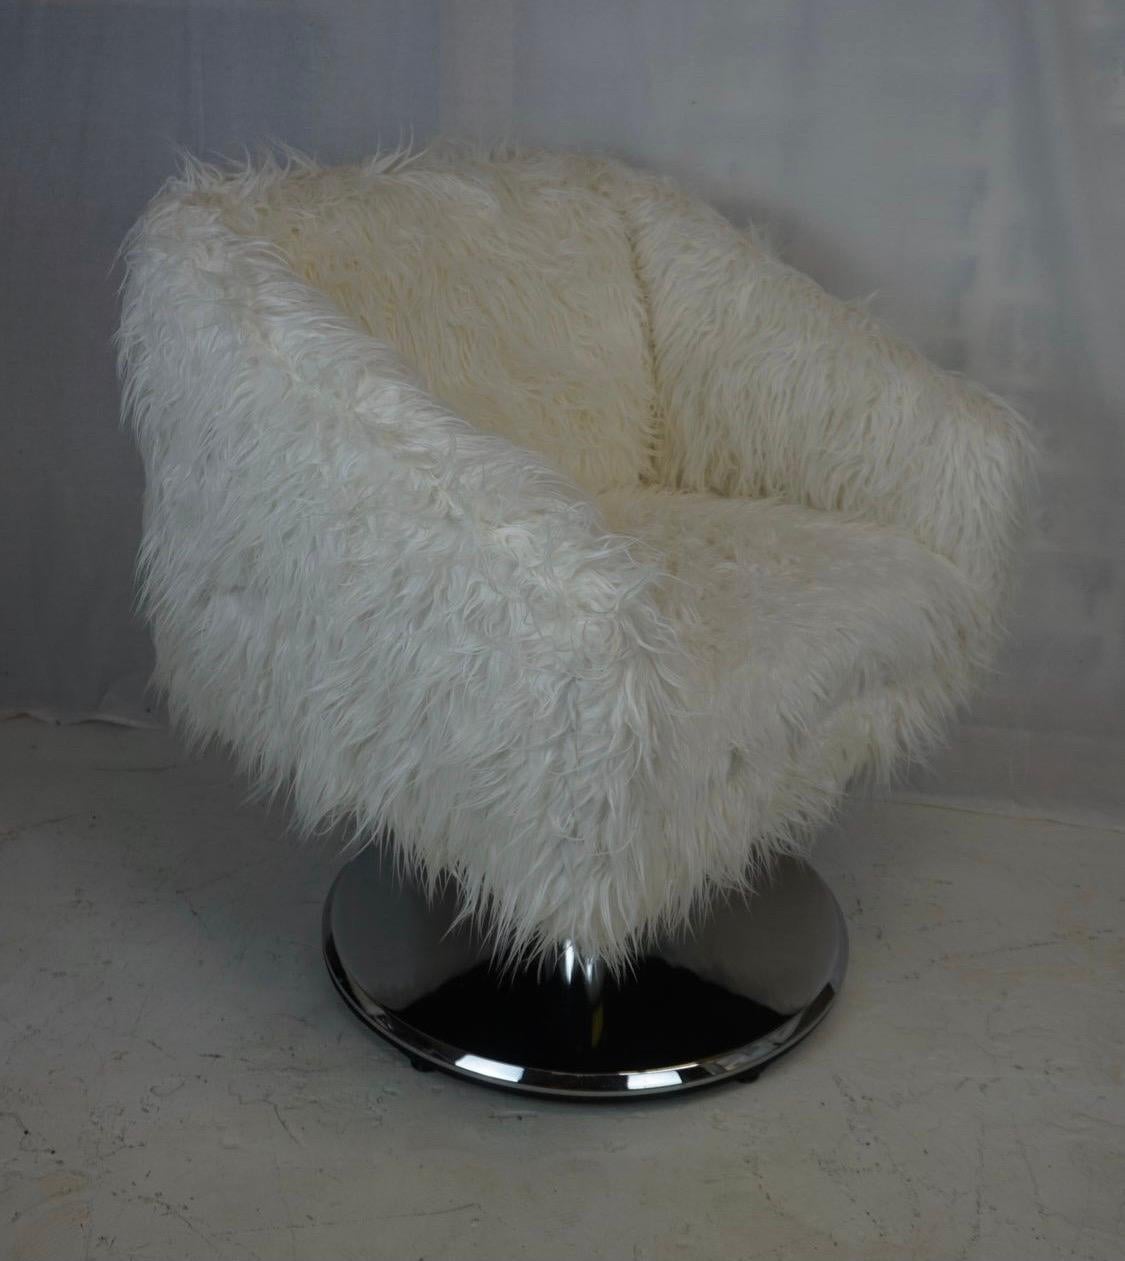 Upholstered in a coveted Mongolian faux fur, this pair of matching Pace swivel chairs are sure to impress. We like the 18